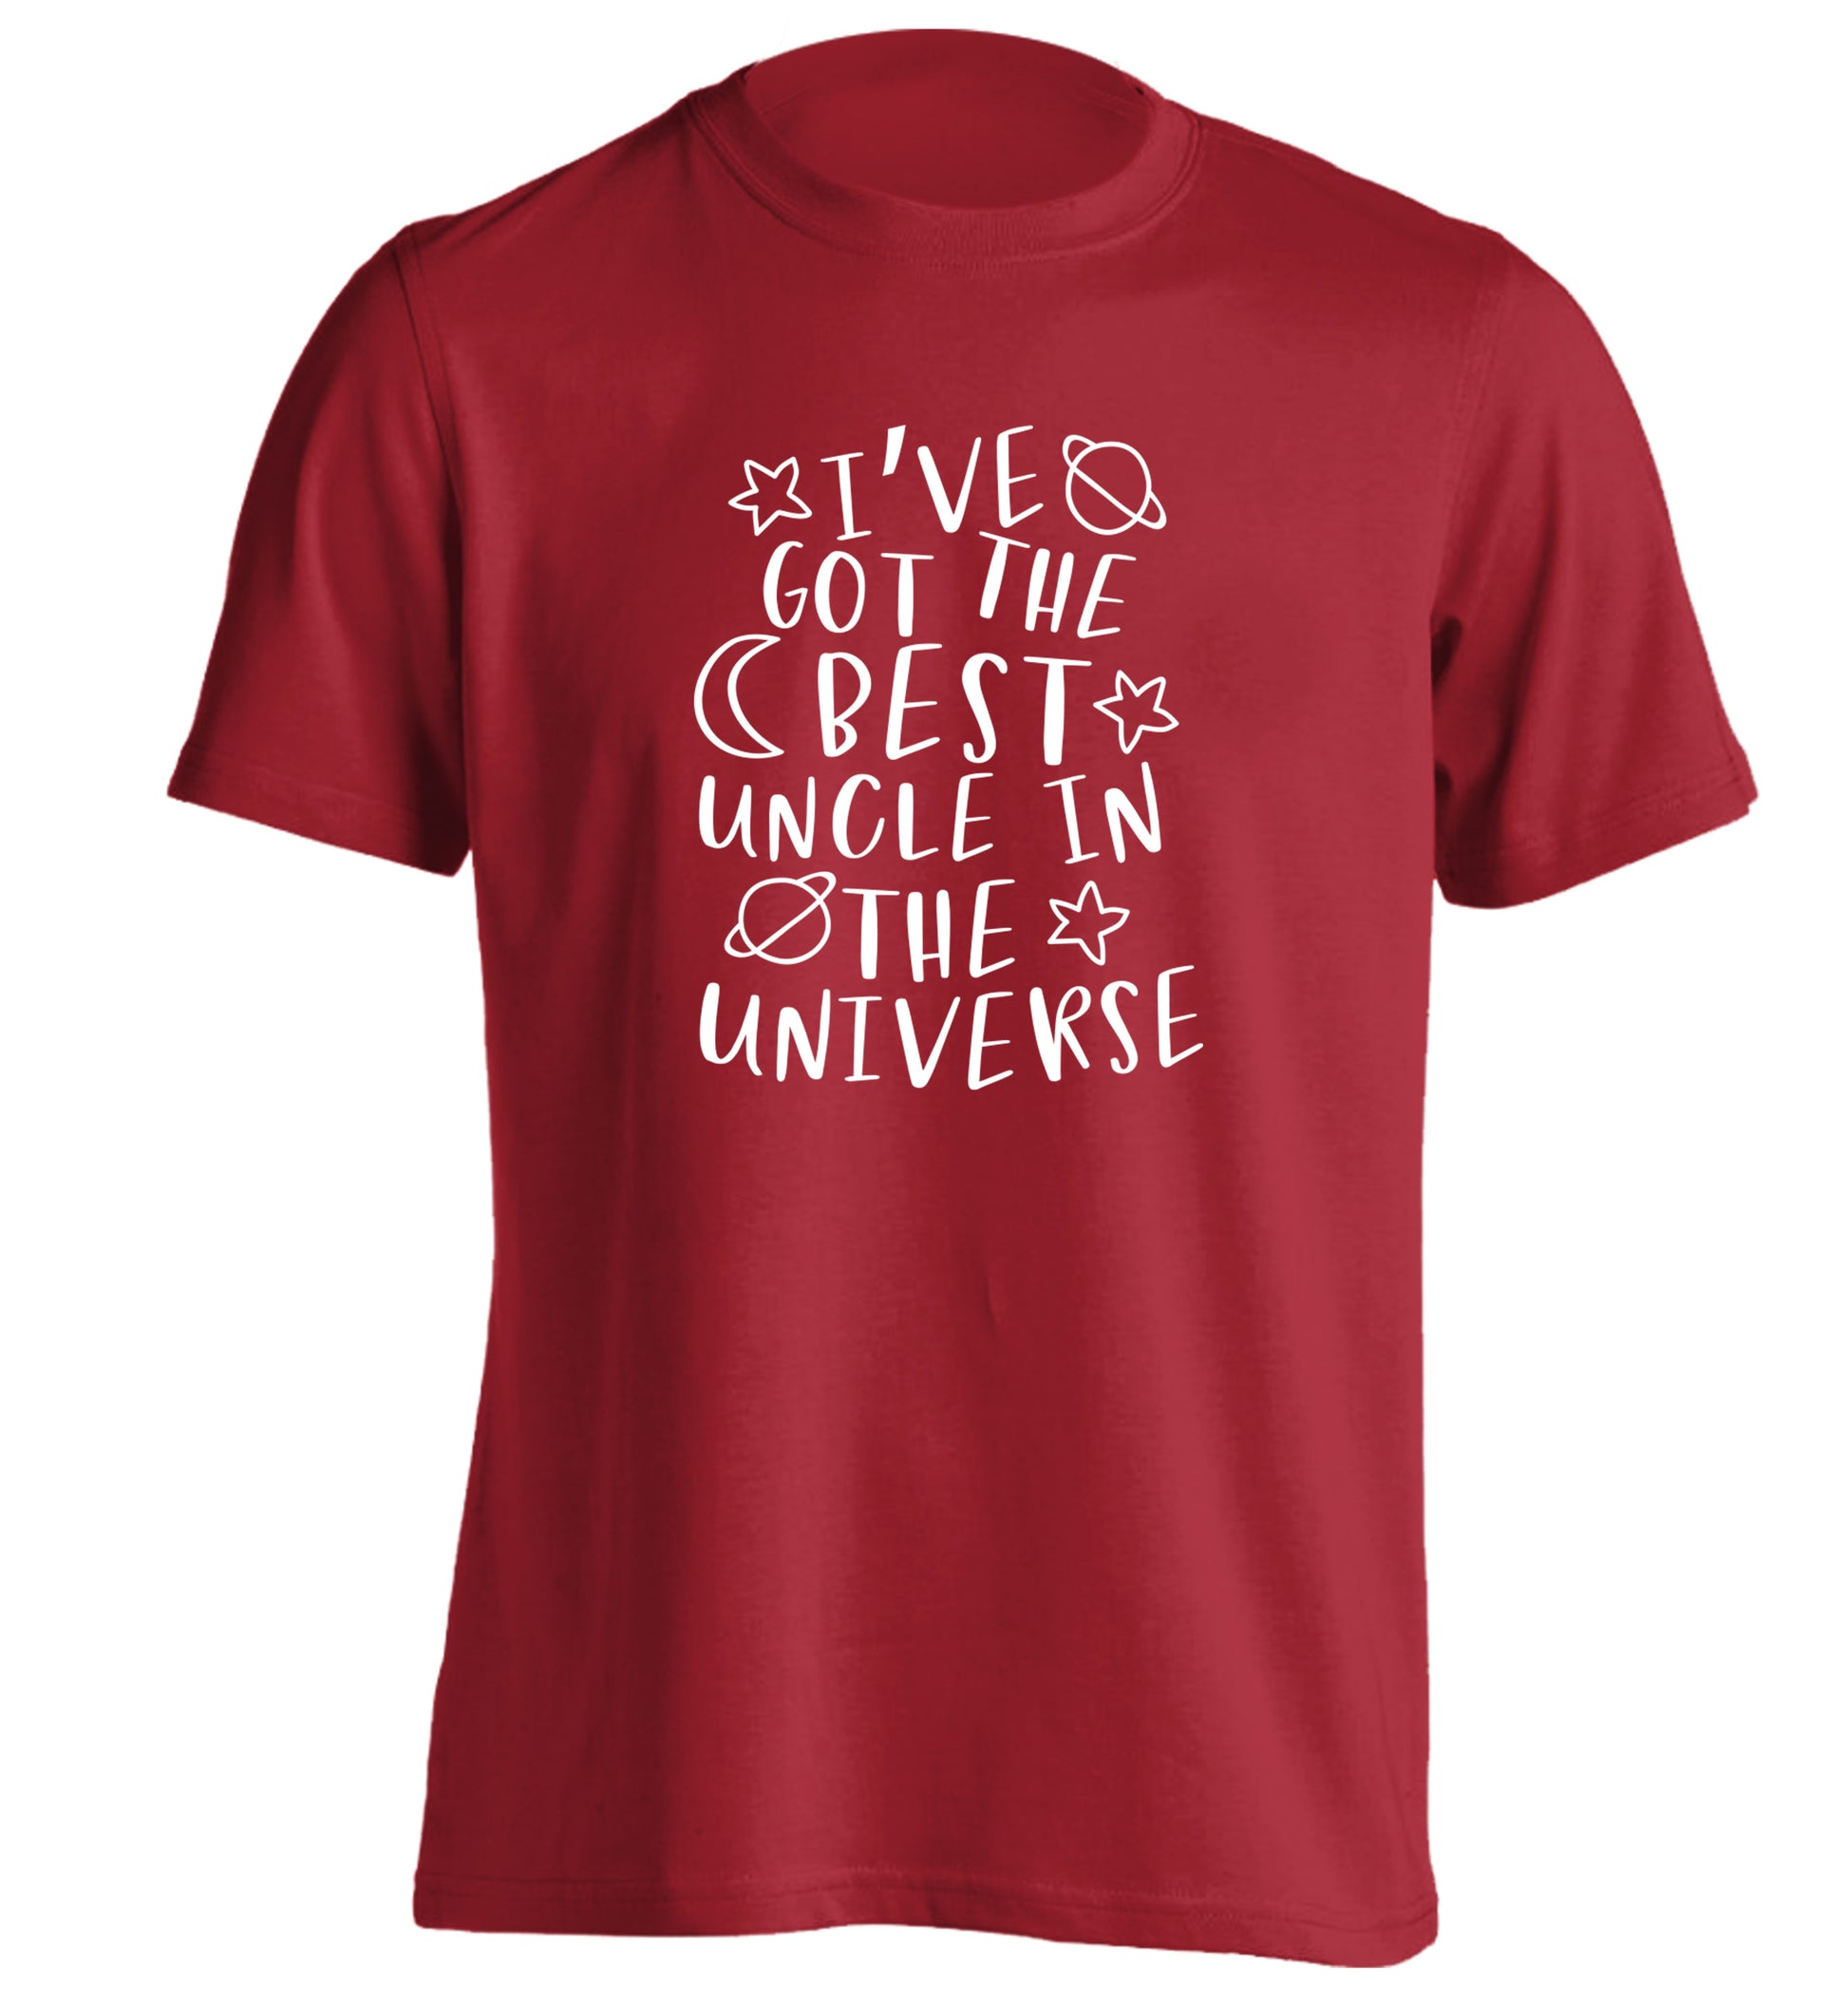 I've got the best uncle in the universe adults unisex red Tshirt 2XL